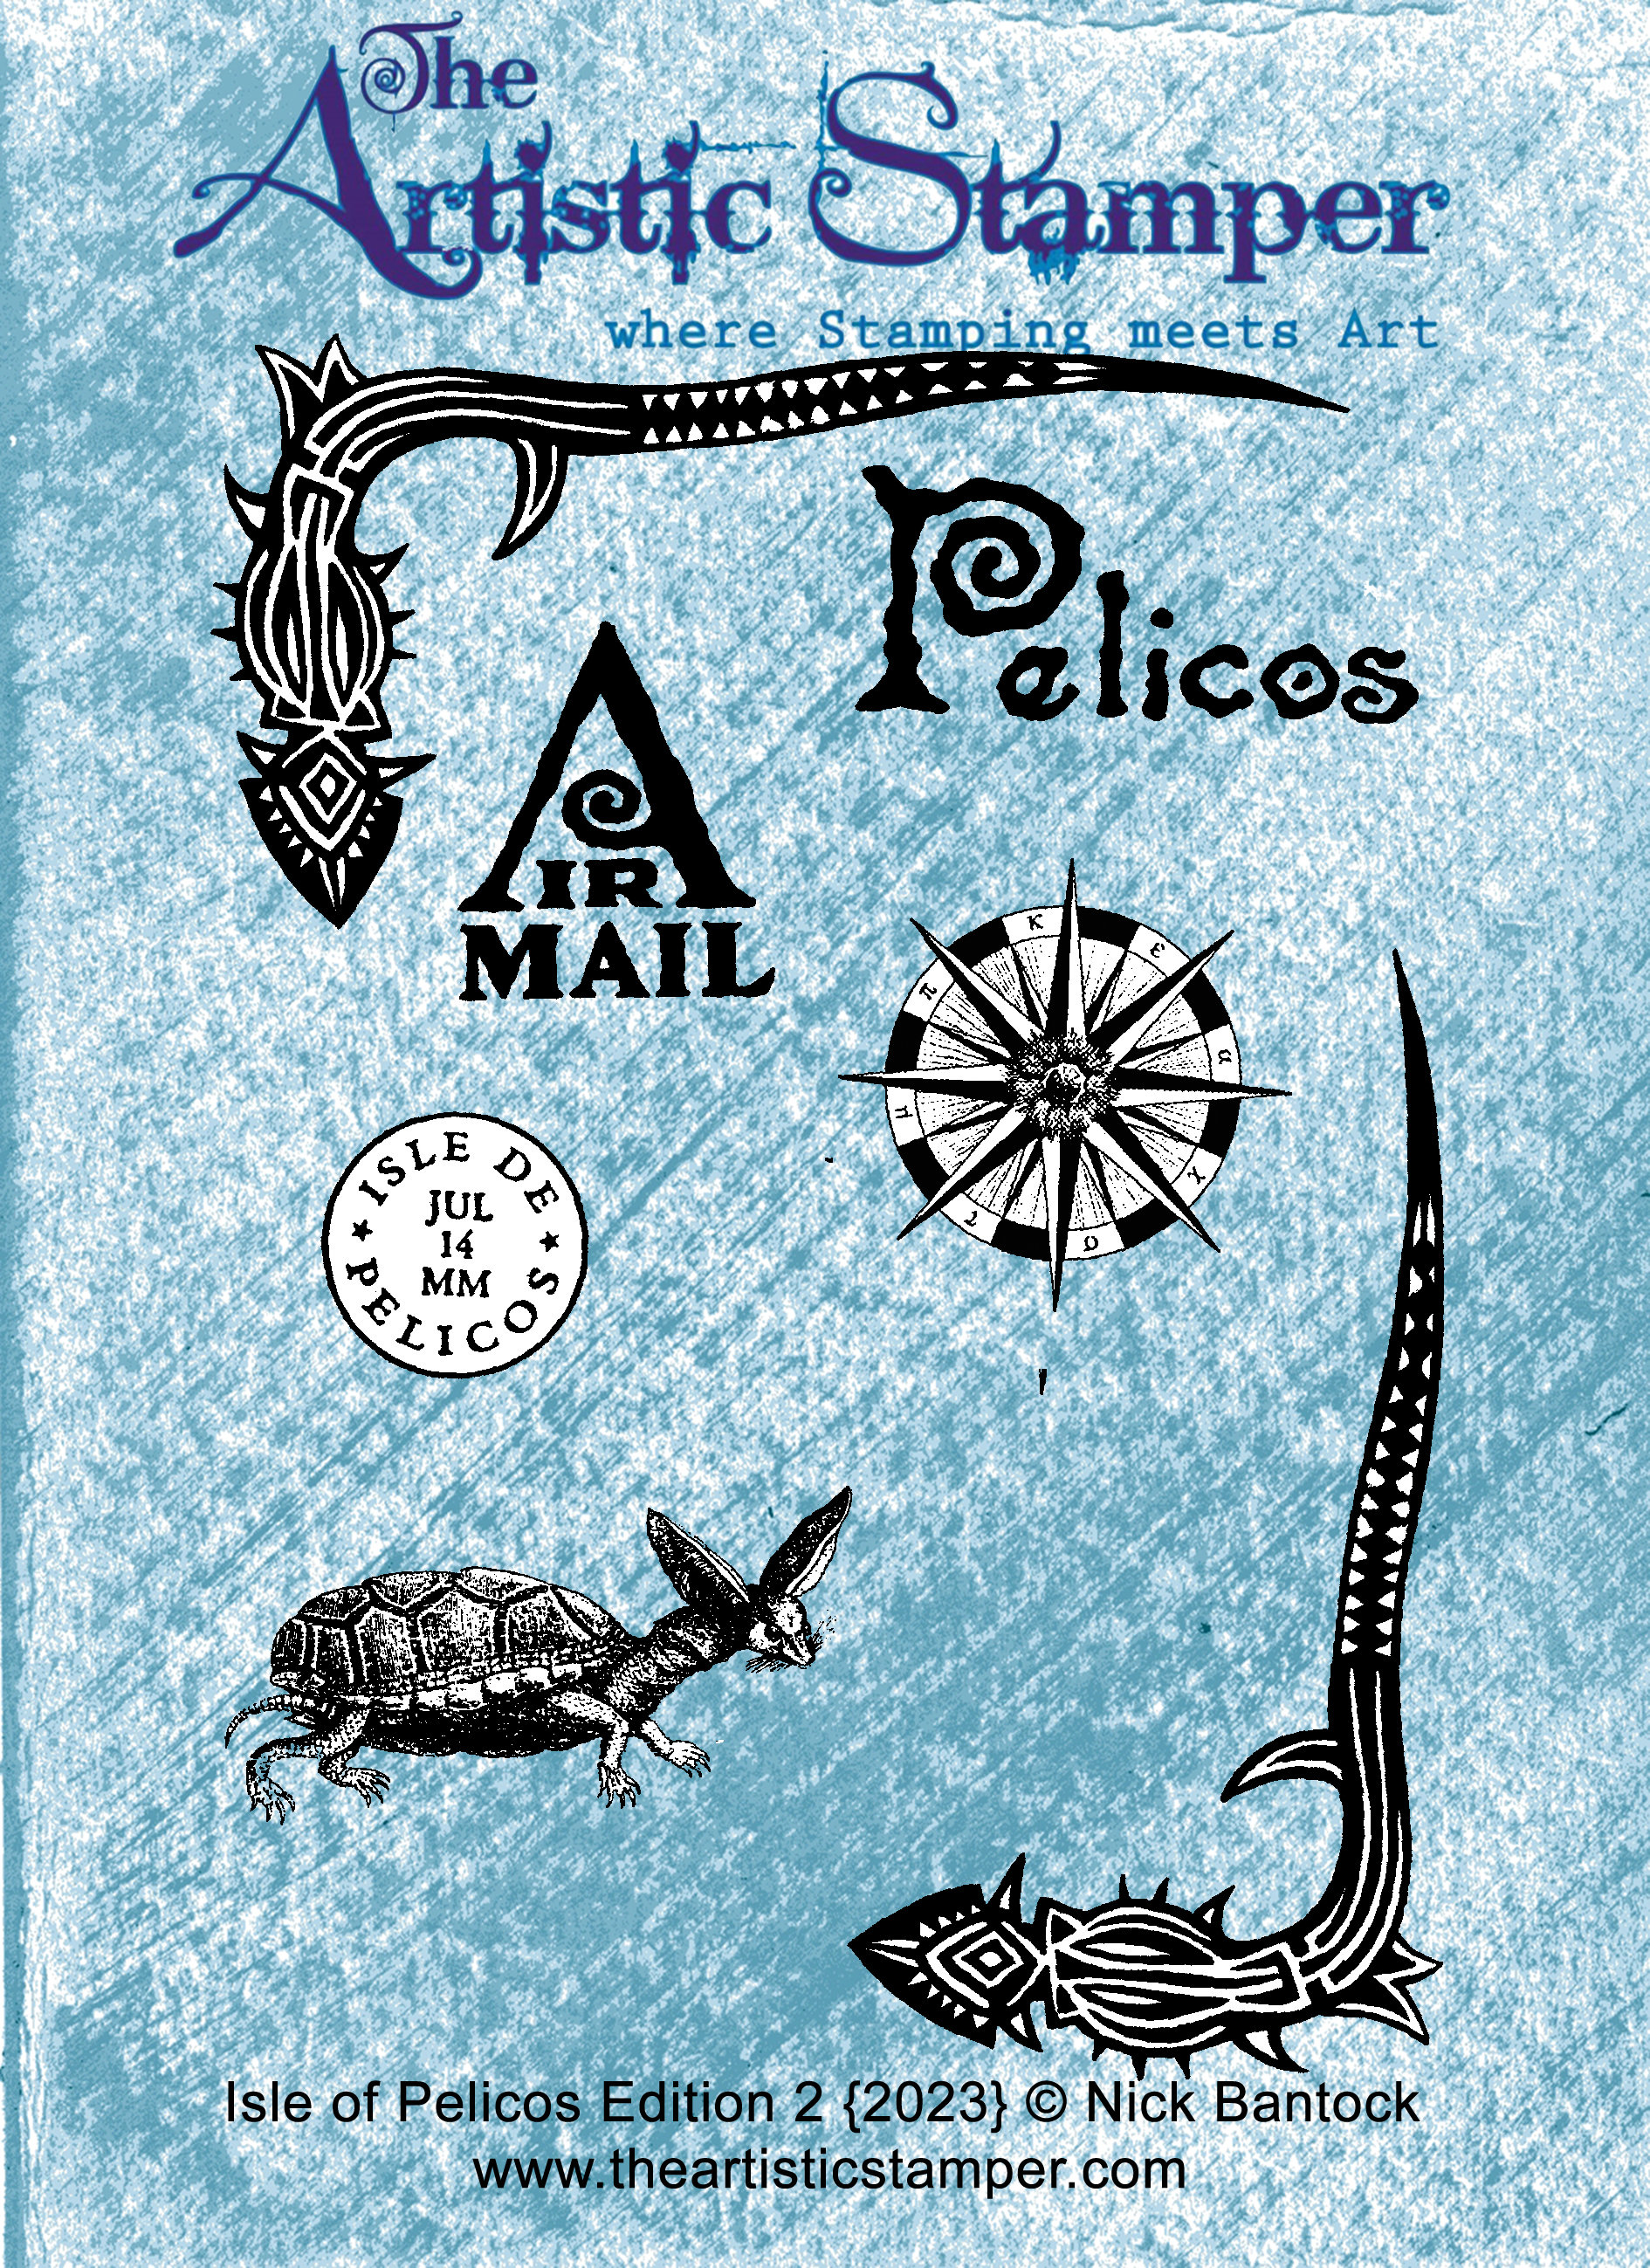 Nick Bantock Cling Rubber Stamp Set: Complete Collection